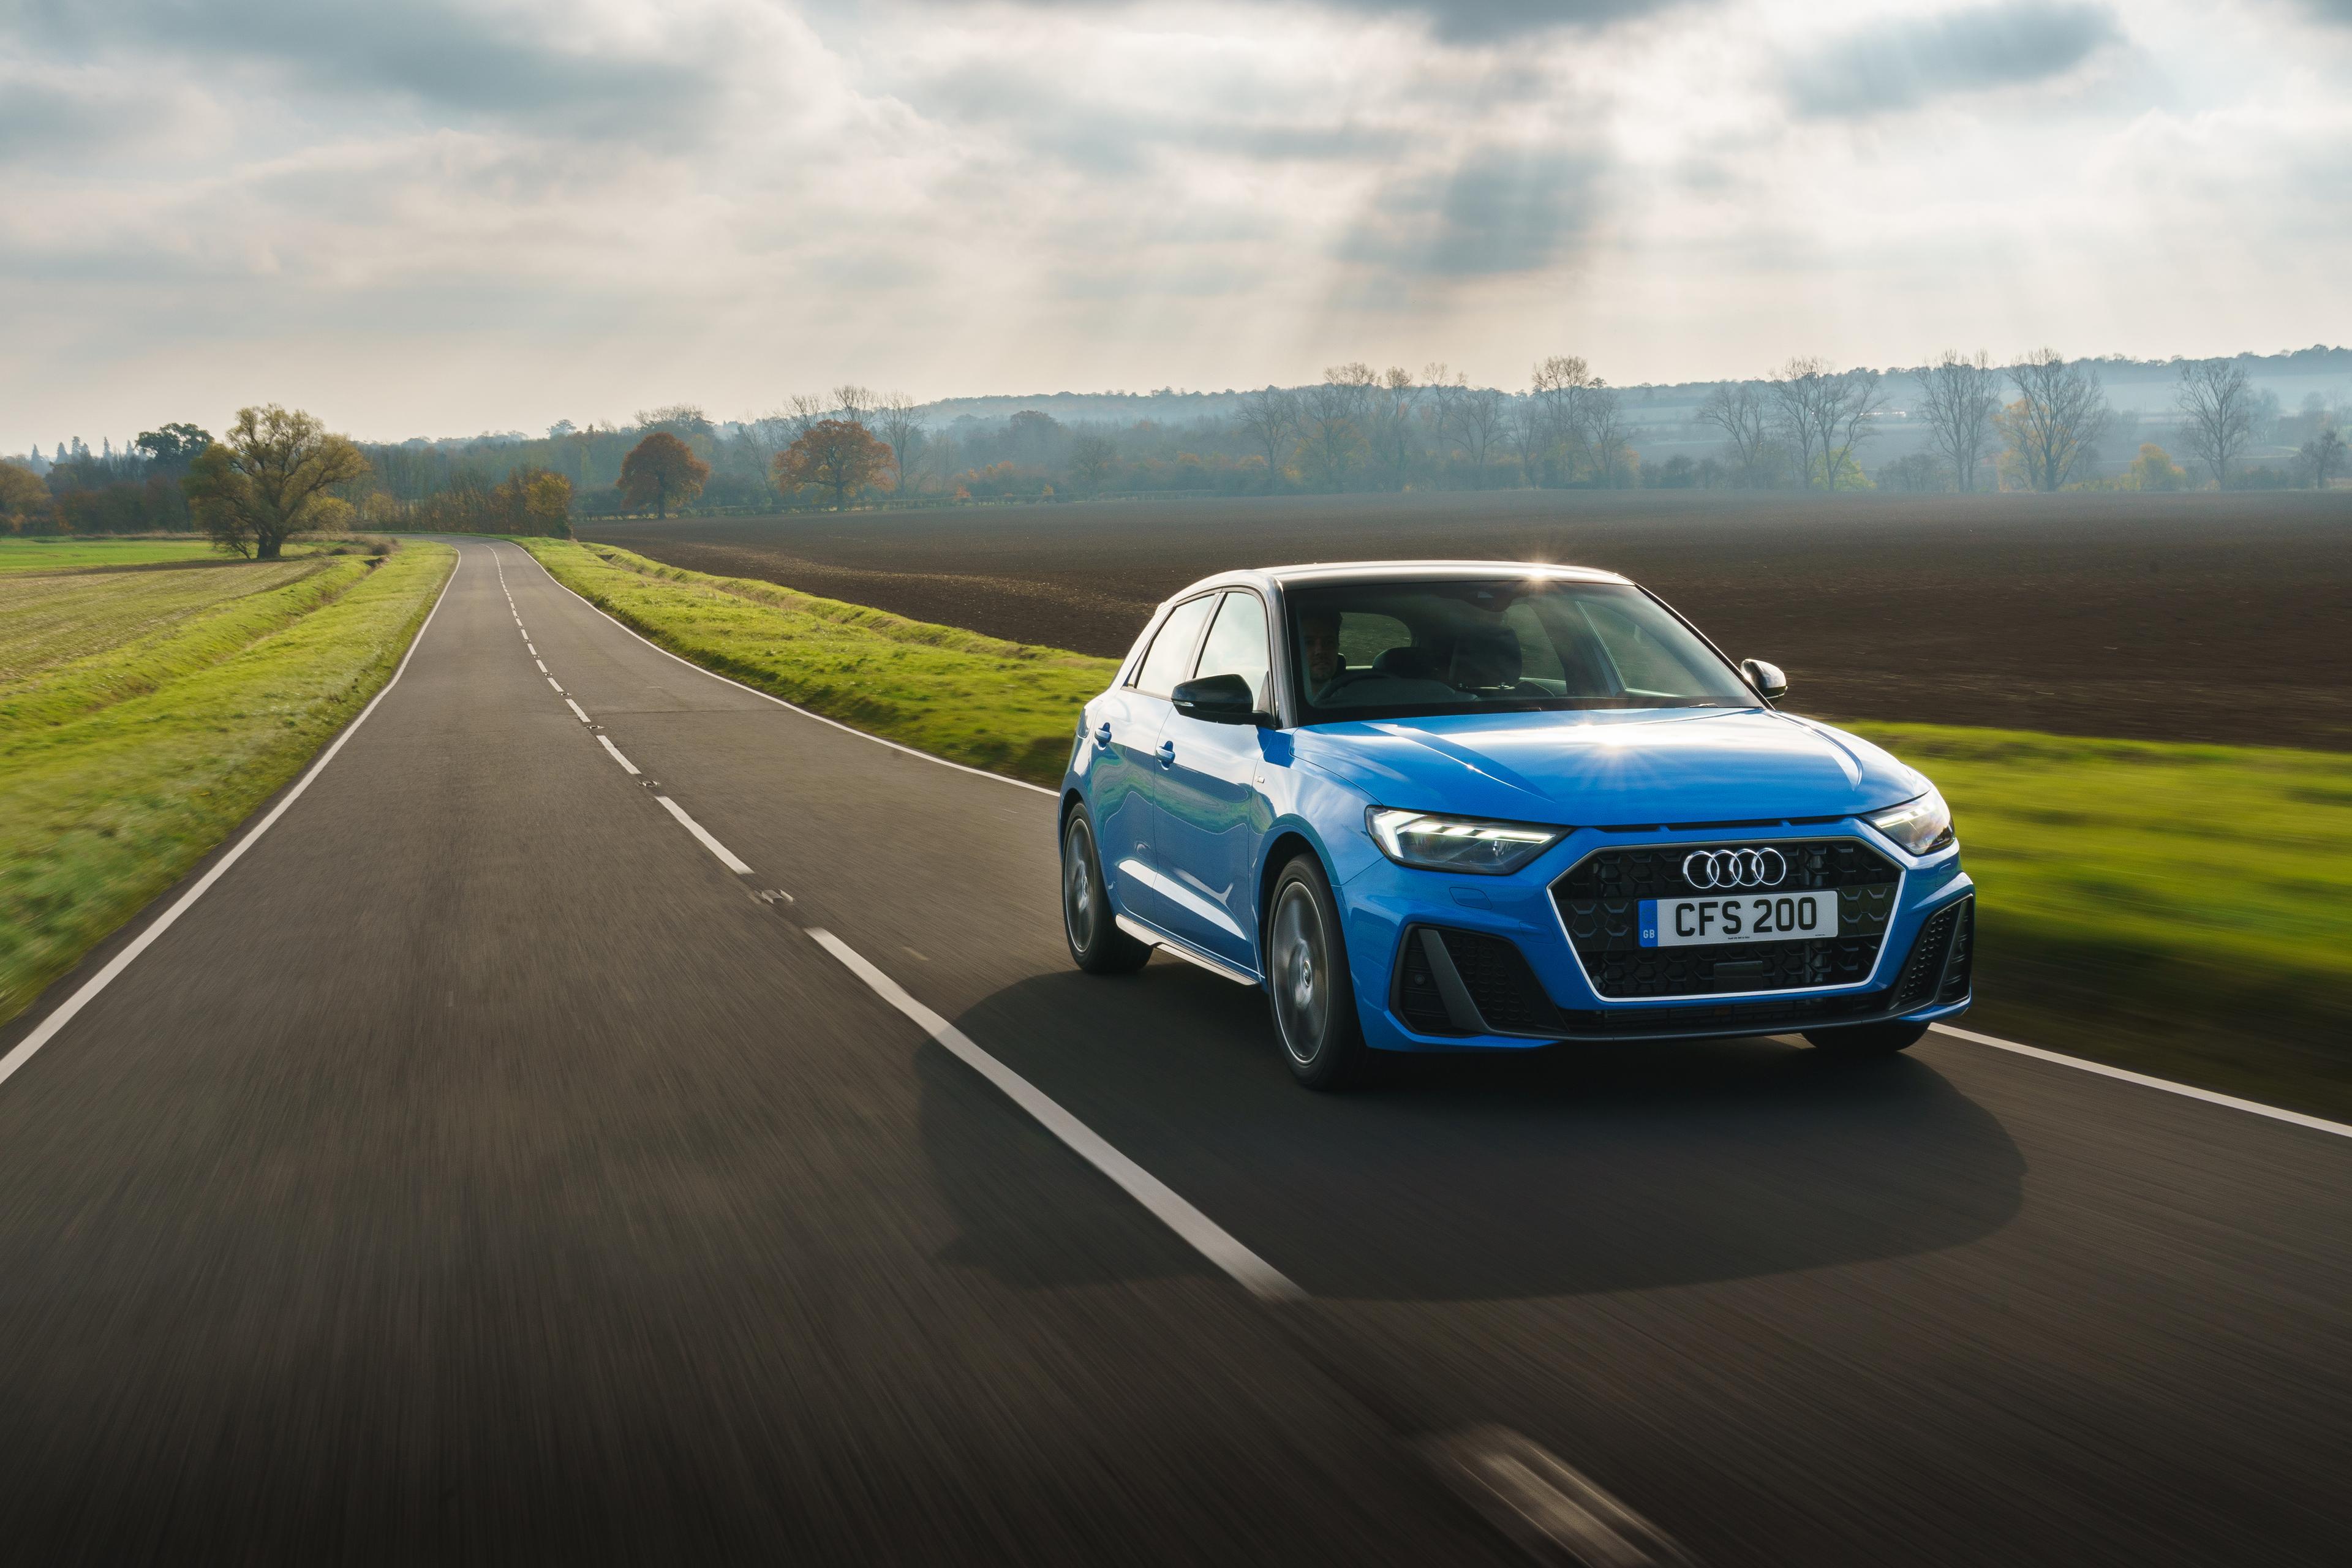 A blue Audi A1 driving on an empty road